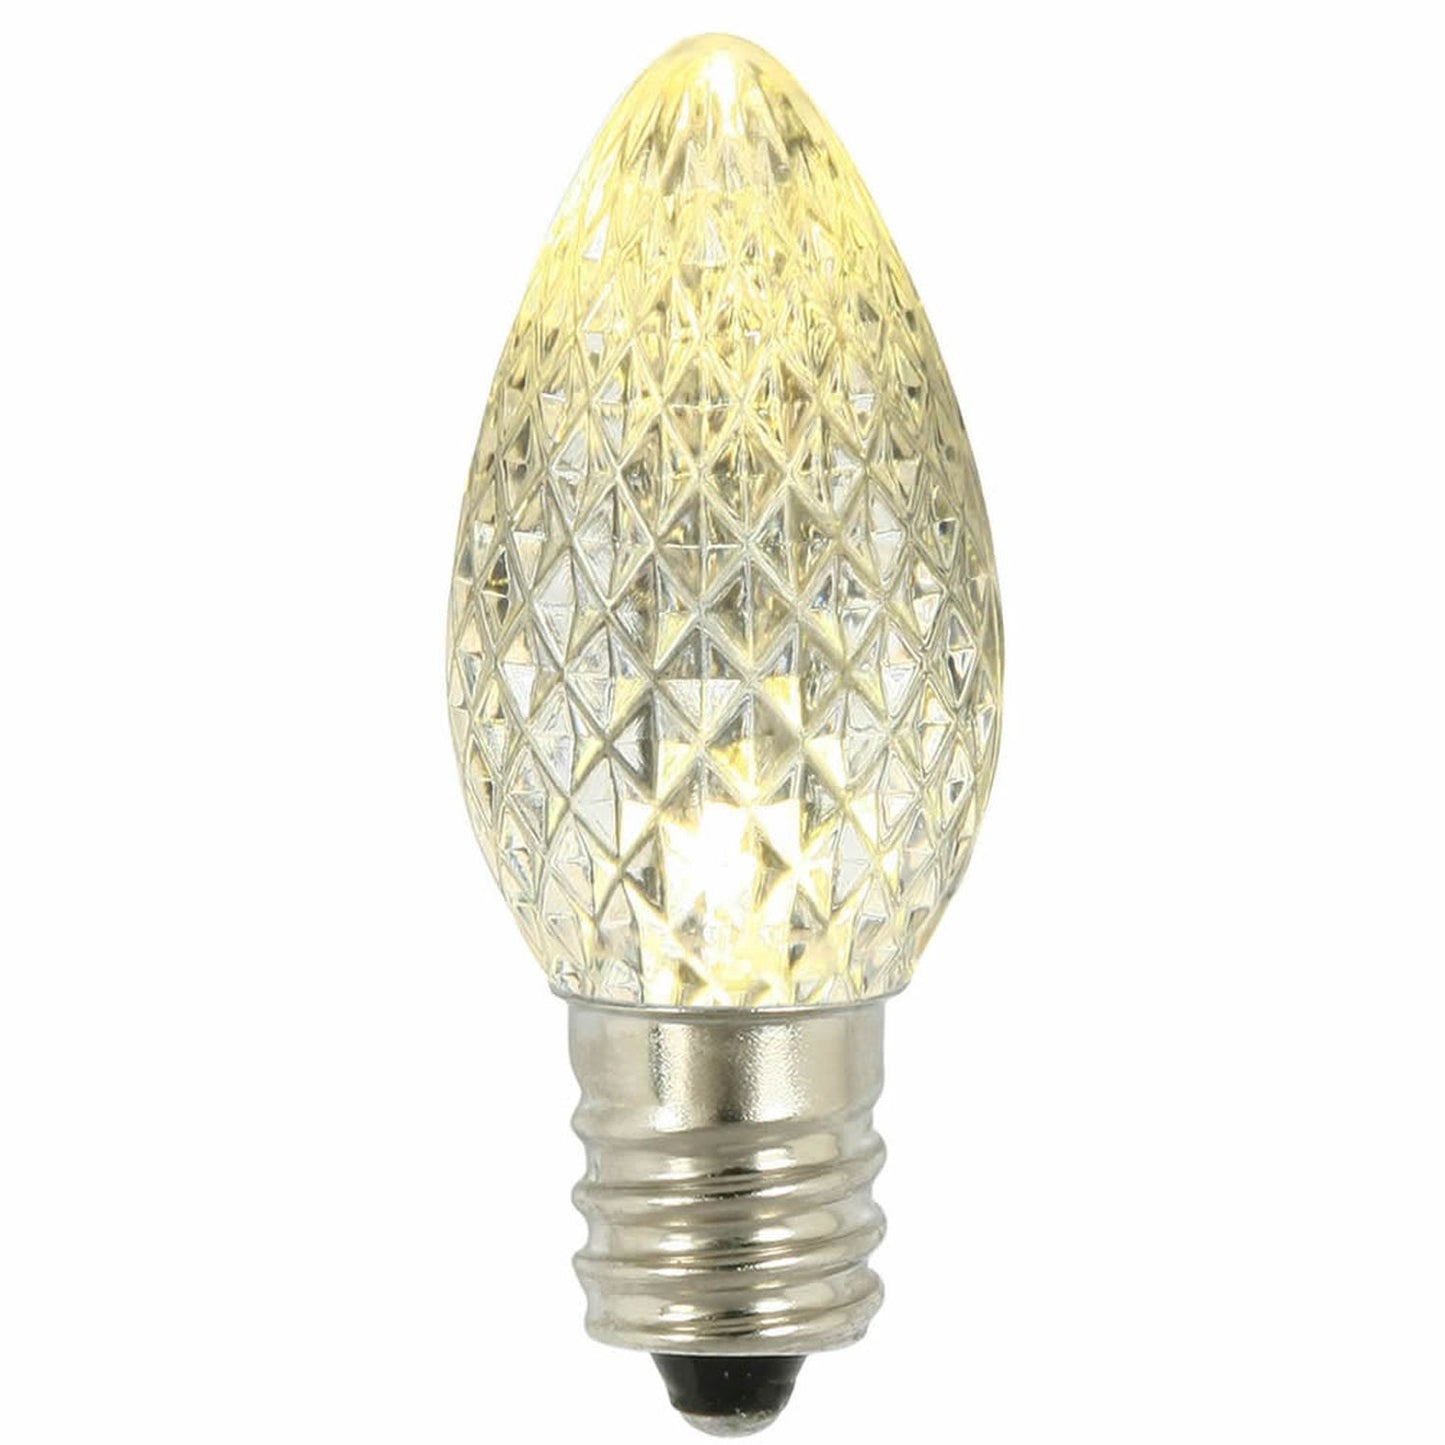 Vickerman C7 LED Warm White Faceted Replacement Bulb, package of 25, Plastic